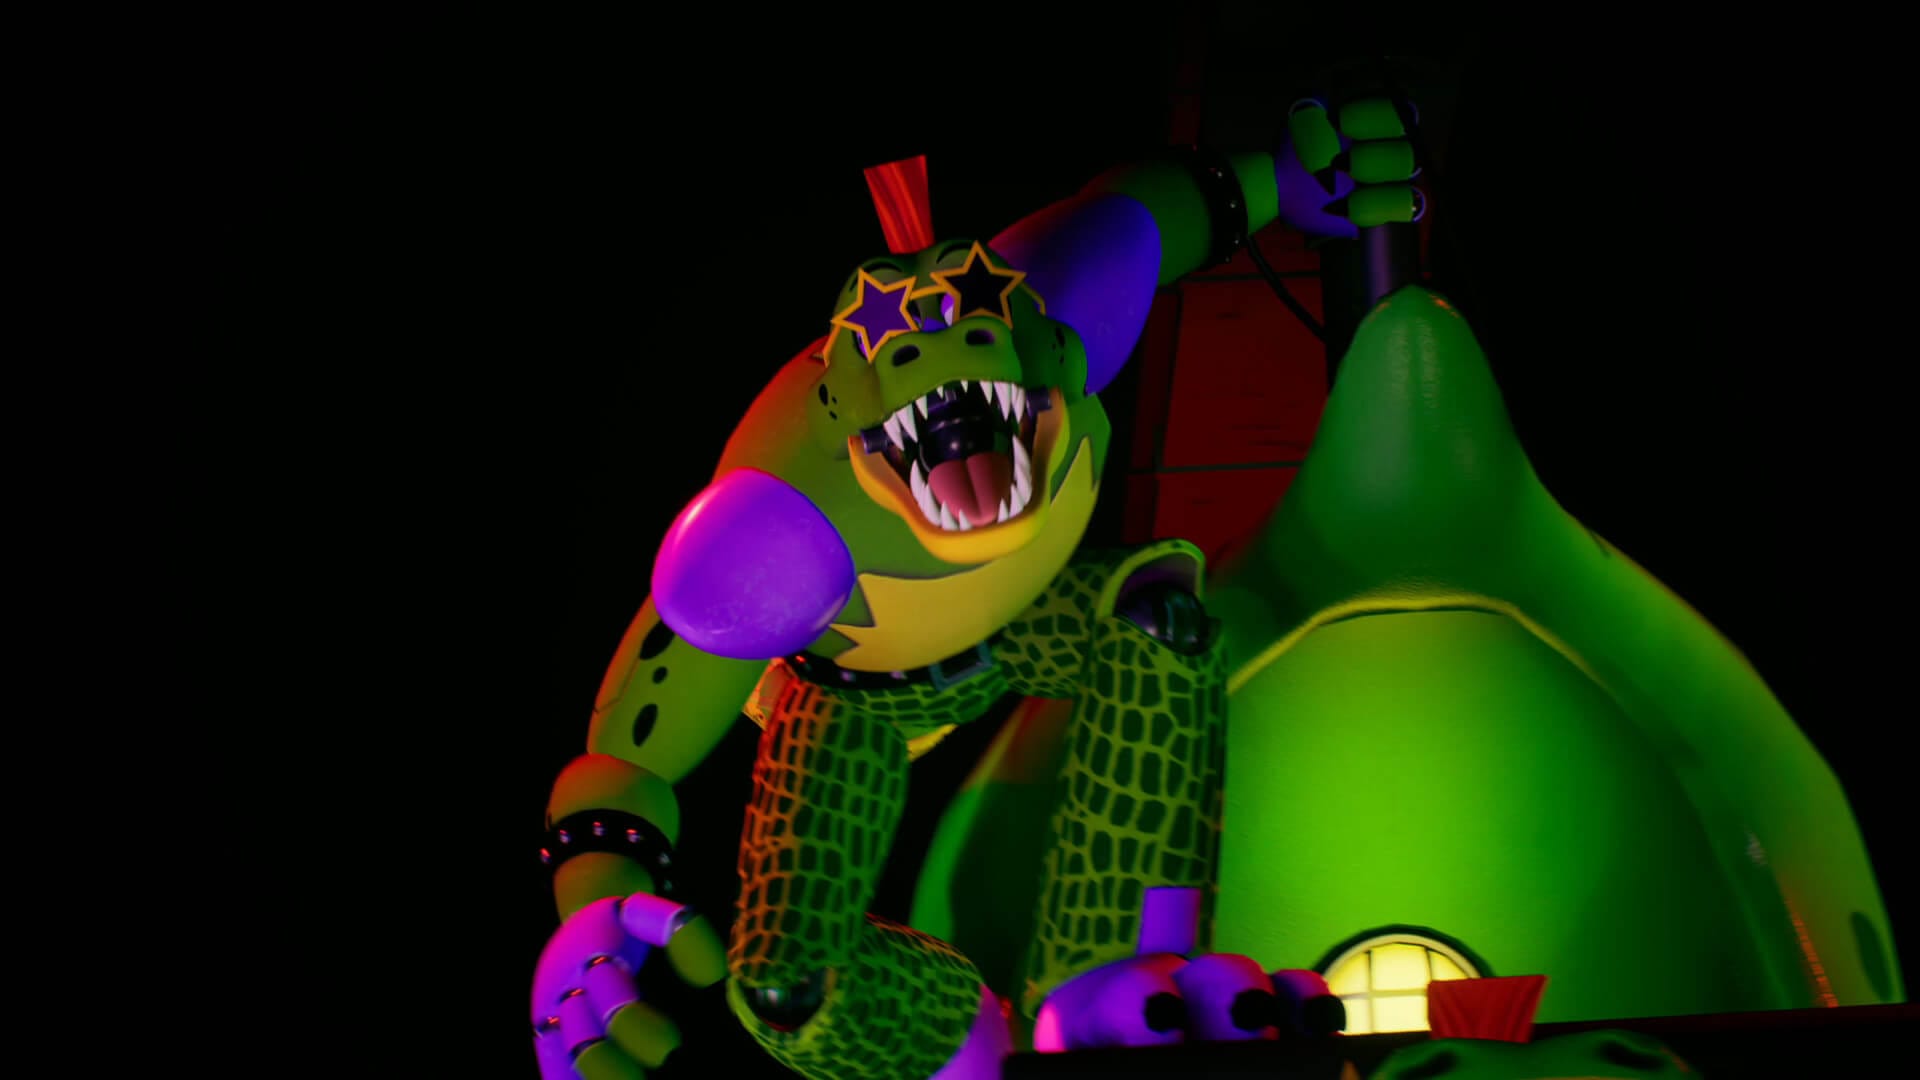 The 'Five Nights at Freddy's' movie wrapped shooting in New